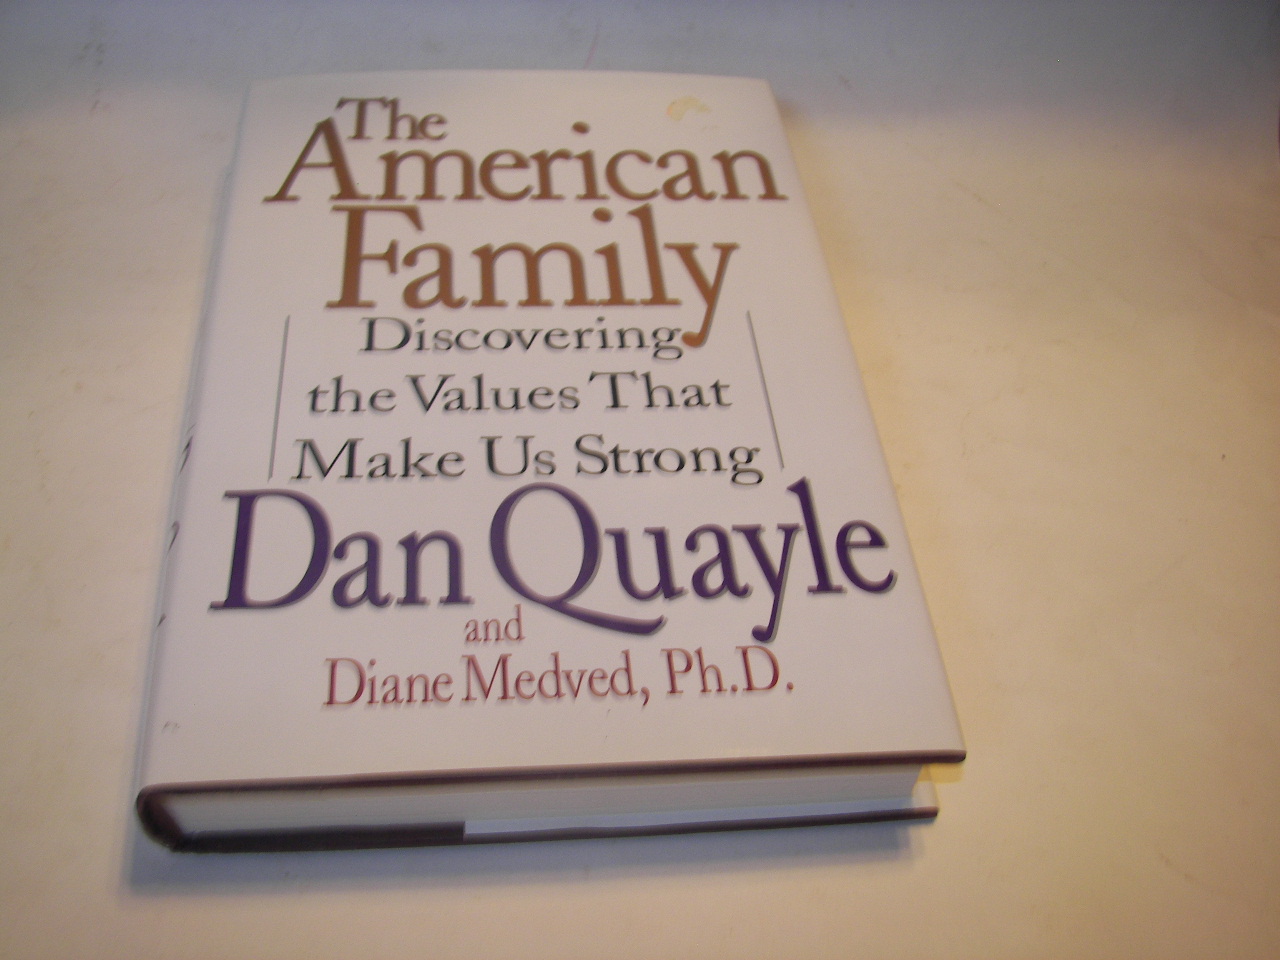 The American Family by Dan Quayle